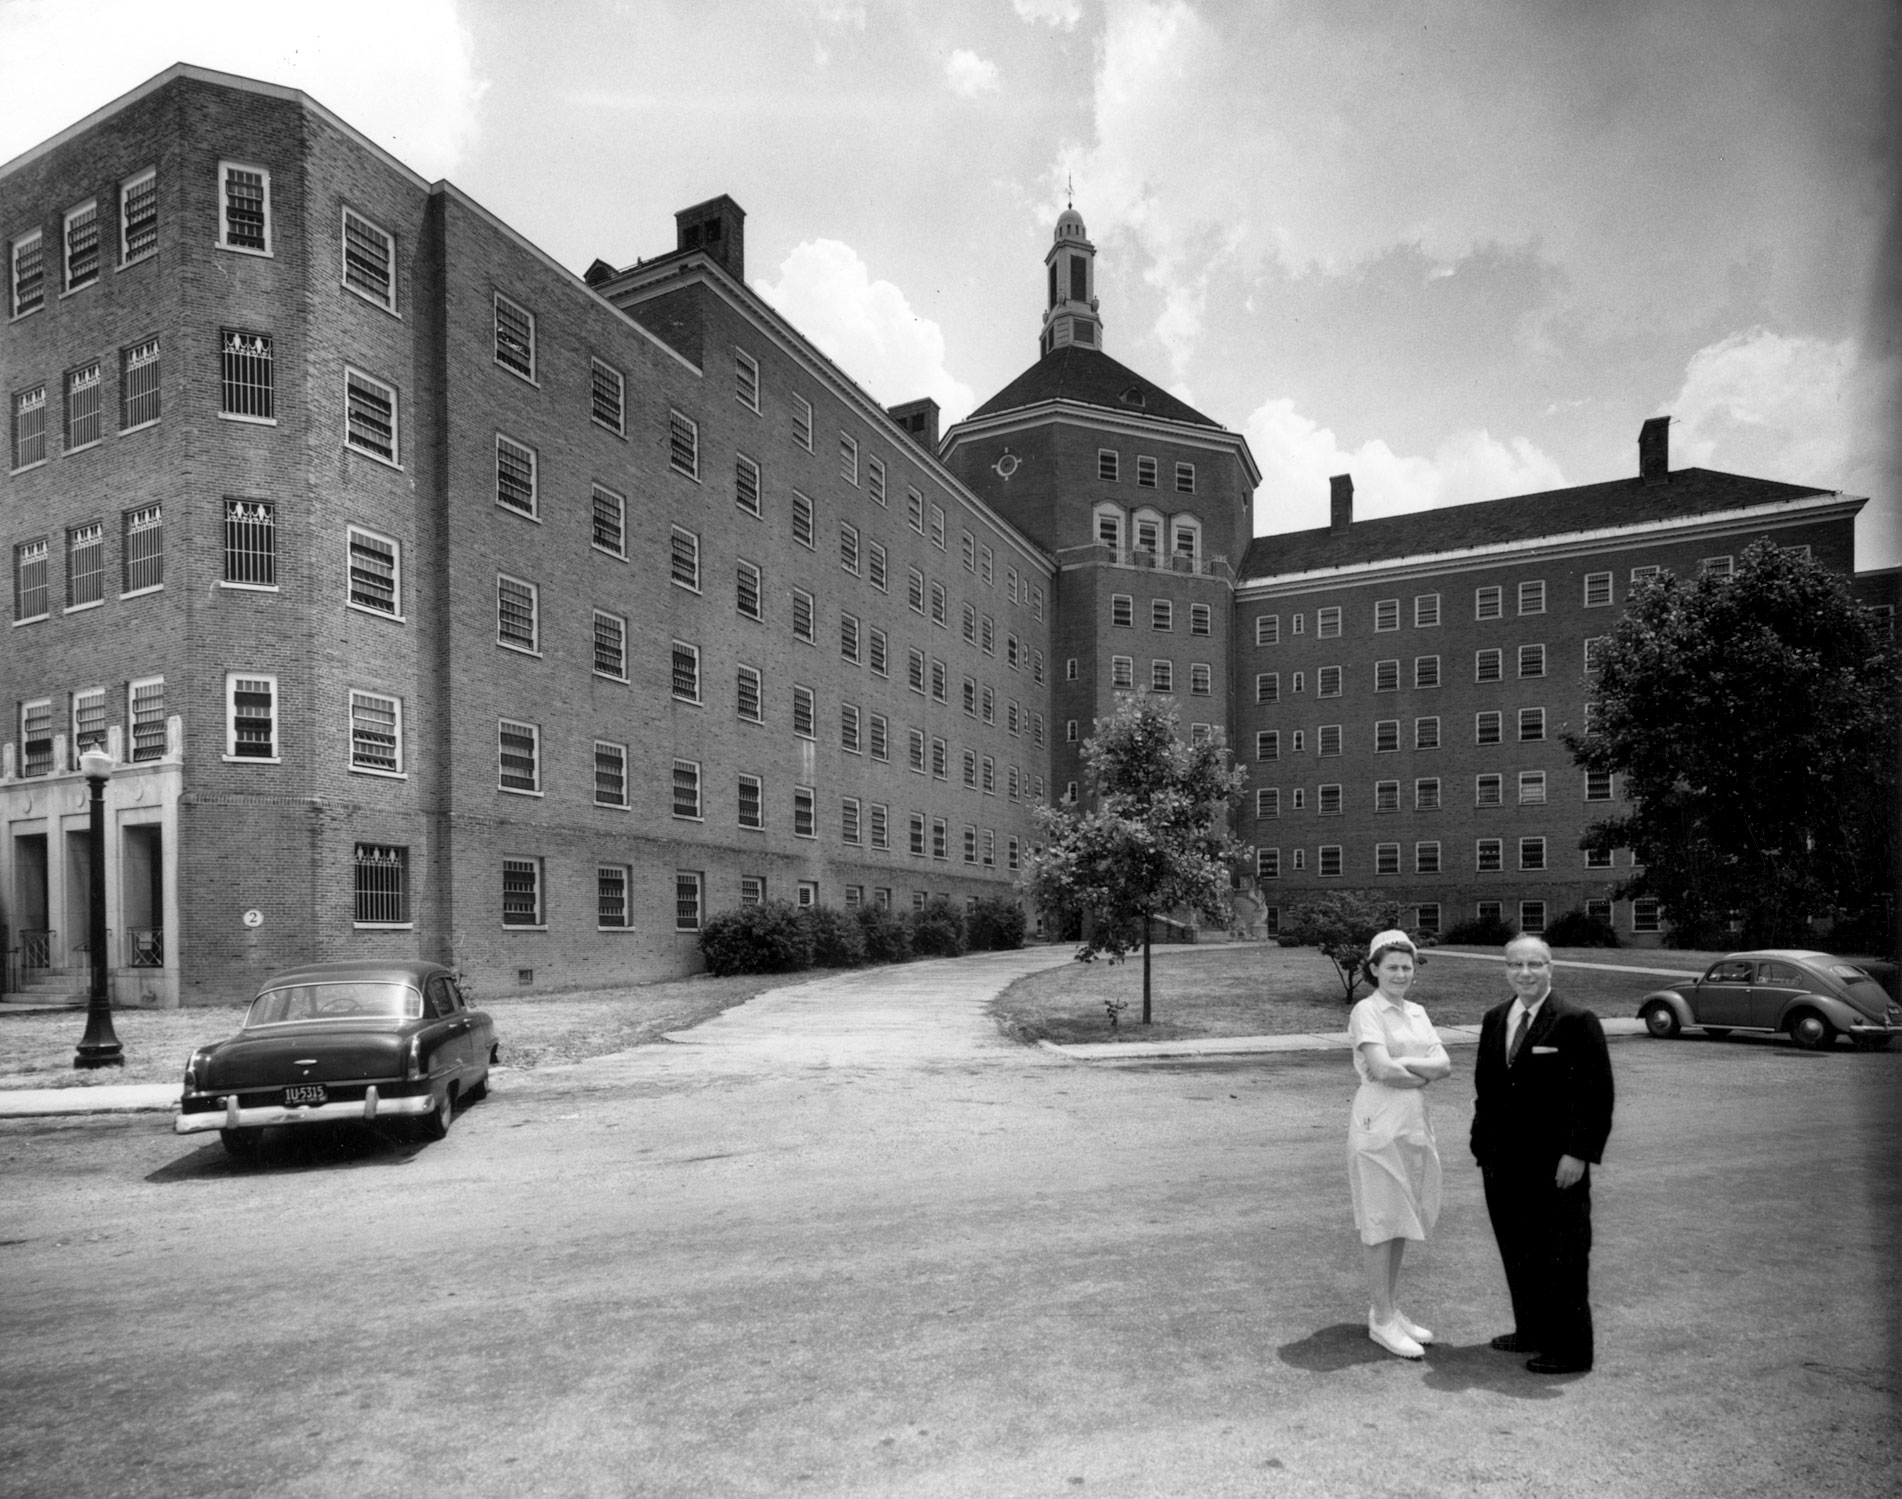 A nurse in a white dress and hat stands next to a man in a dark suit on the far right in the foreground of a black and white photograph. Behind them, taking up the background of the image is a large brick building.